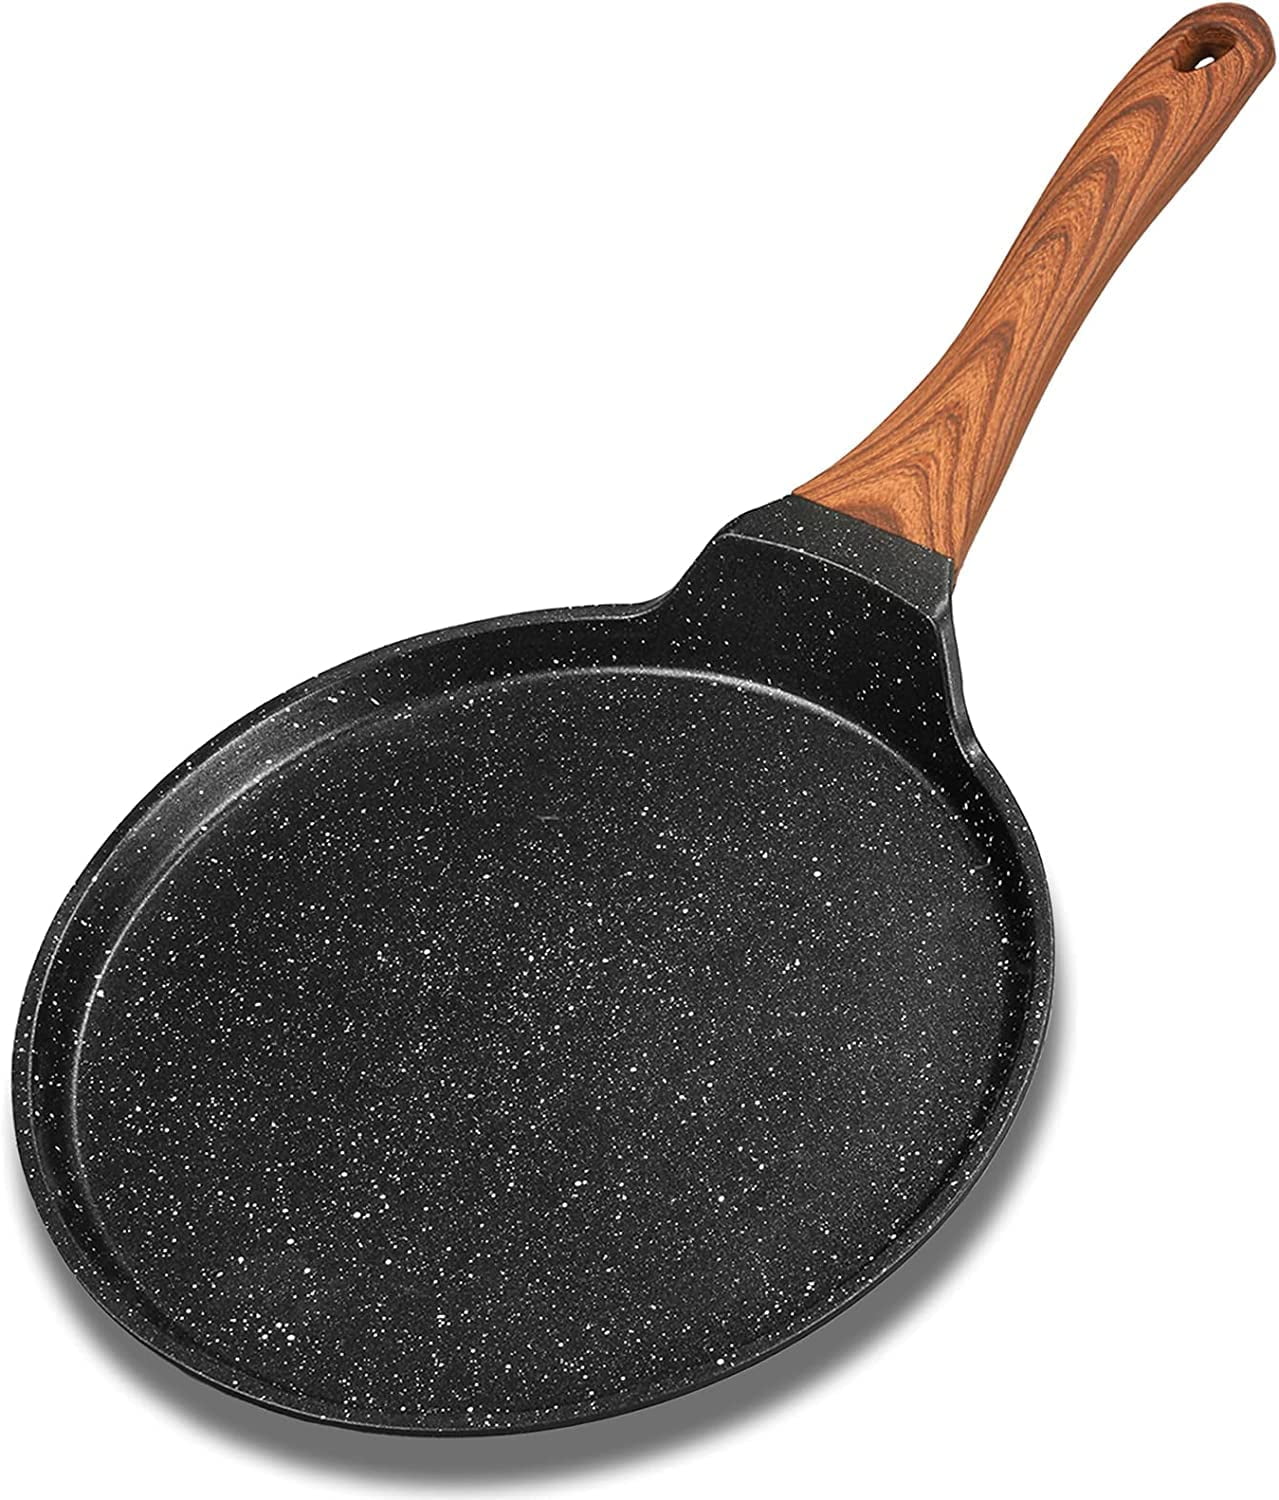 Vinchef Nonstick Crepe Pan, 11inch Skillet Pan For Dosa Tawa Omelette  Tortillas